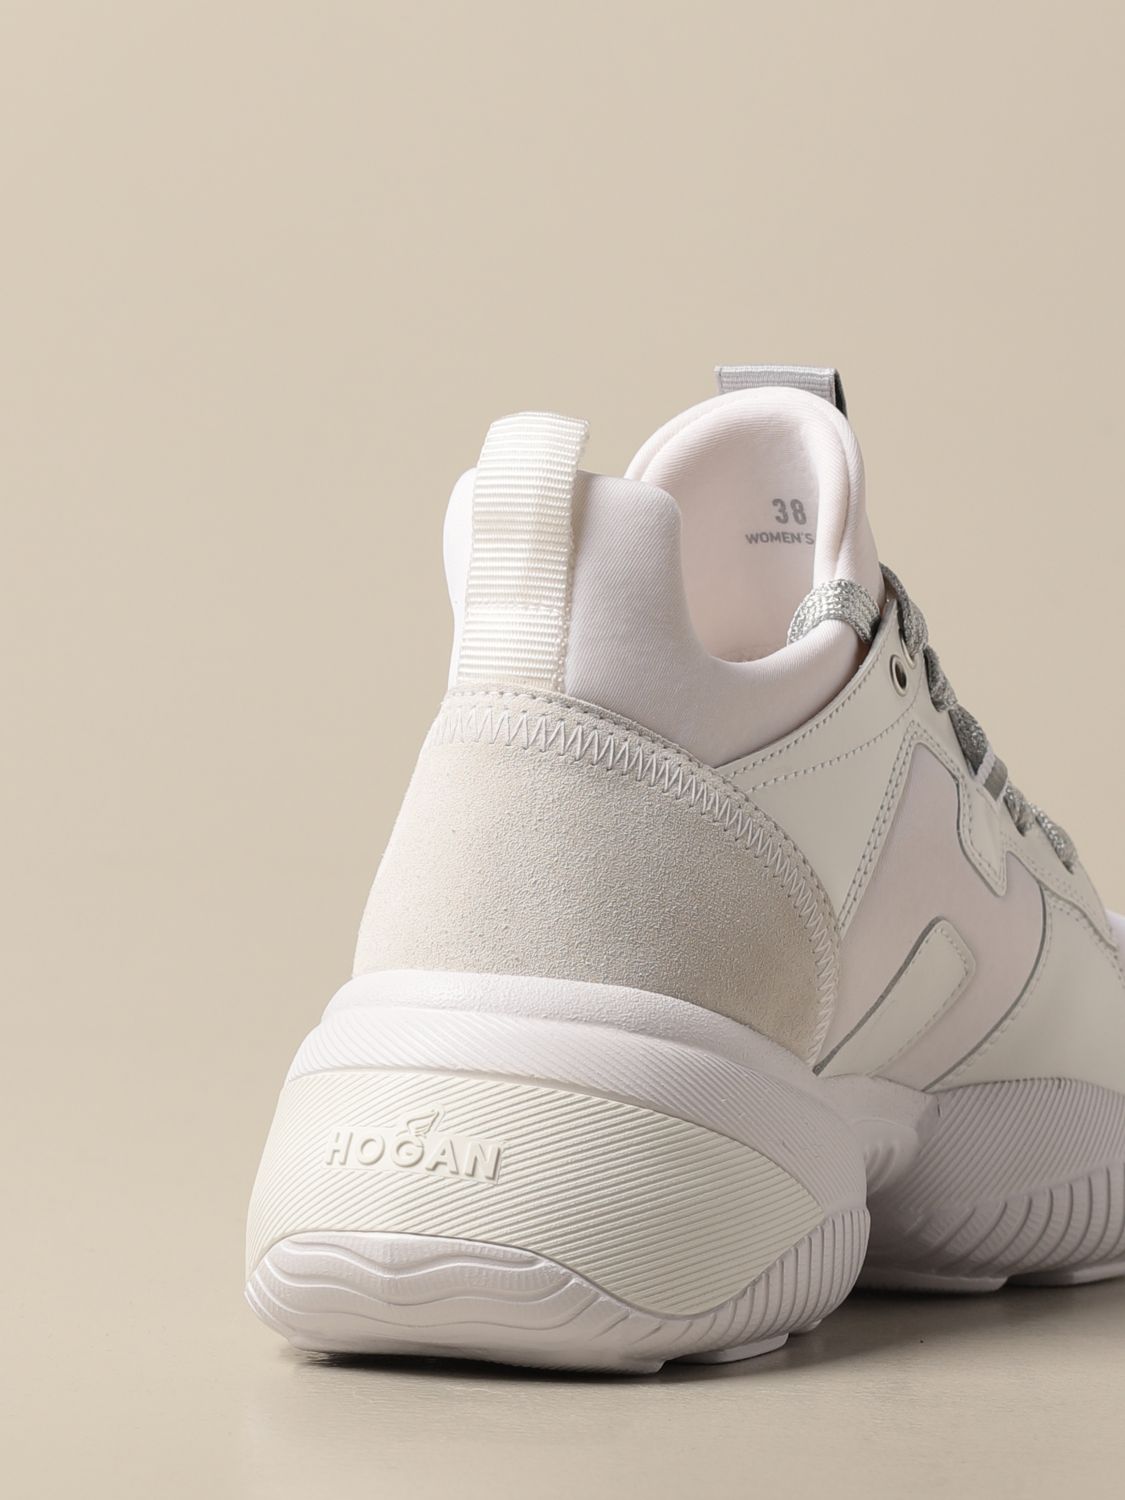 HOGAN: Interaction sneakers in suede leather and neoprene | Sneakers Hogan Women White | Sneakers HXW5250CH20 MSY GIGLIO.COM